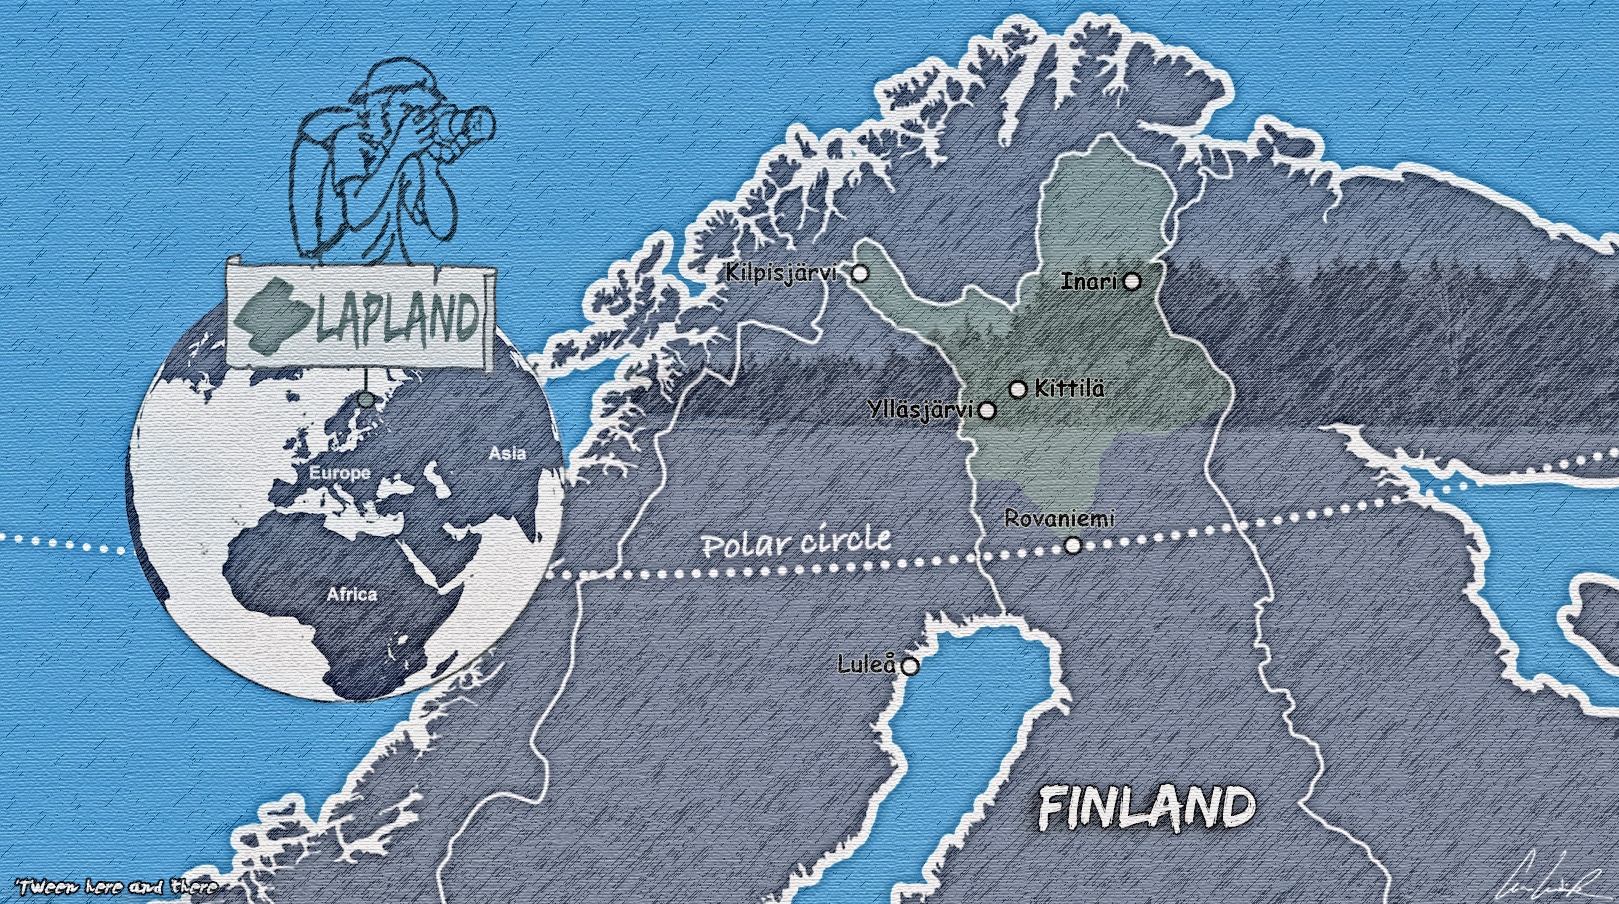 Here's a map of Finnish Lapland. Finnish Lapland is the northern-most region of Finland. It extends over almost 39,000 square miles to the north of the Province of Oulu.